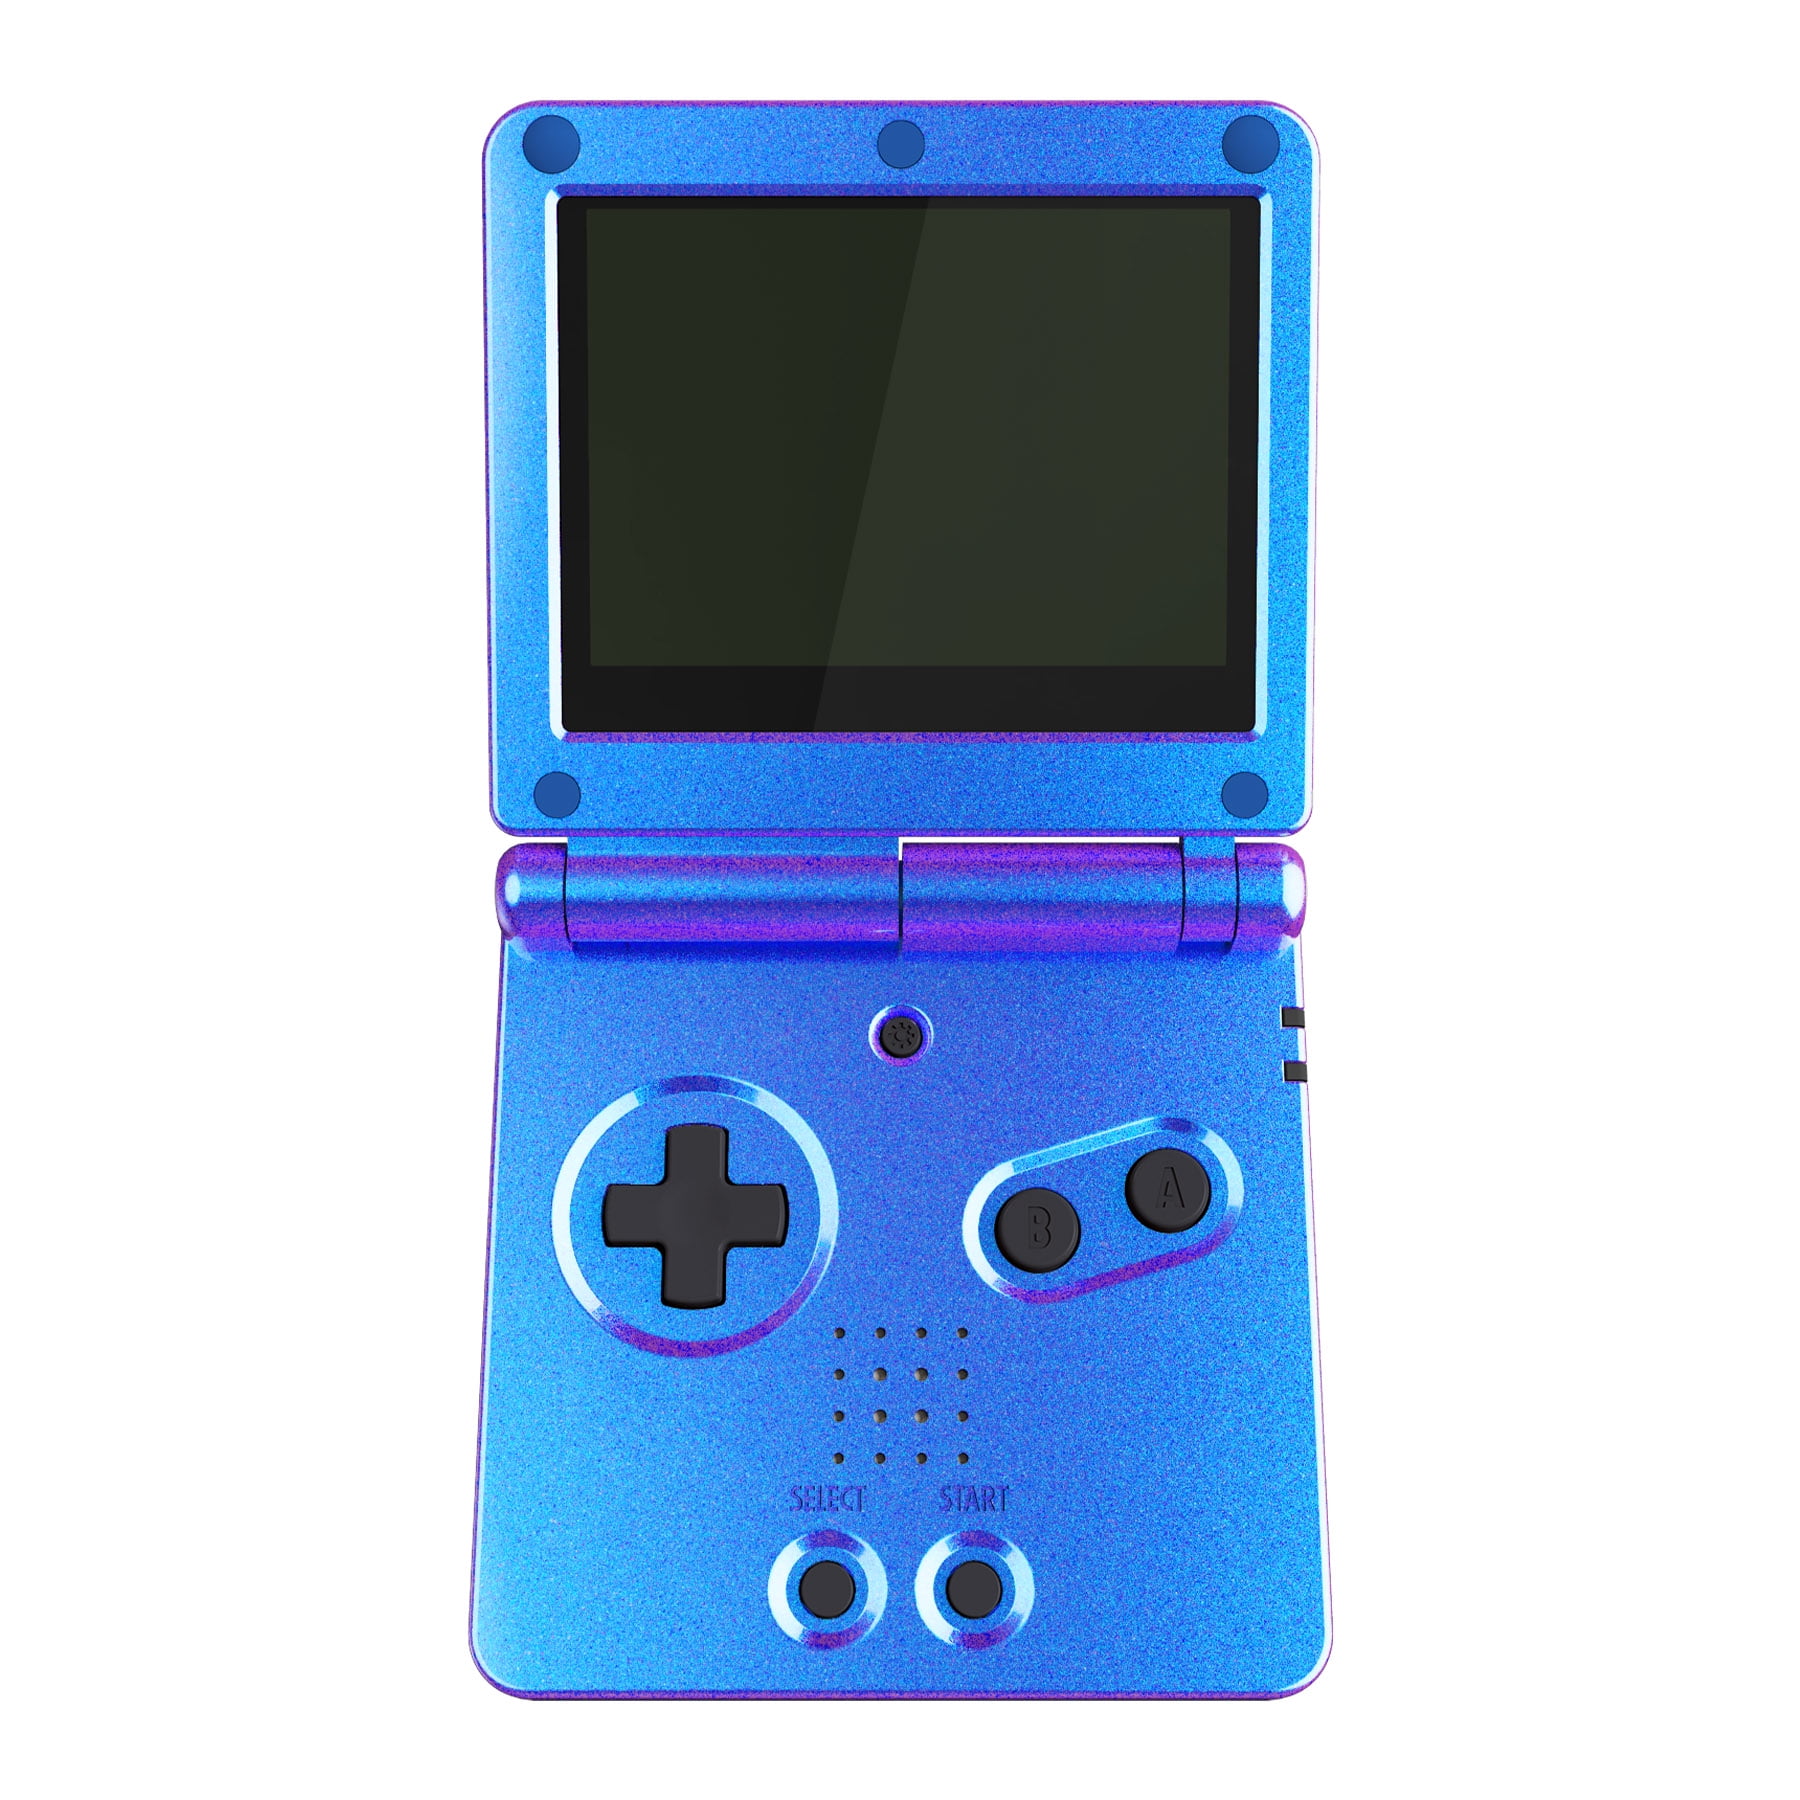 IPS Upgraded eXtremeRate Chameleon Purple Blue Glossy Custom Replacement Housing Shell for Gameboy Advance SP GBA SP – Compatible with IPS & Standard LCD – Console & Screen NOT Included -